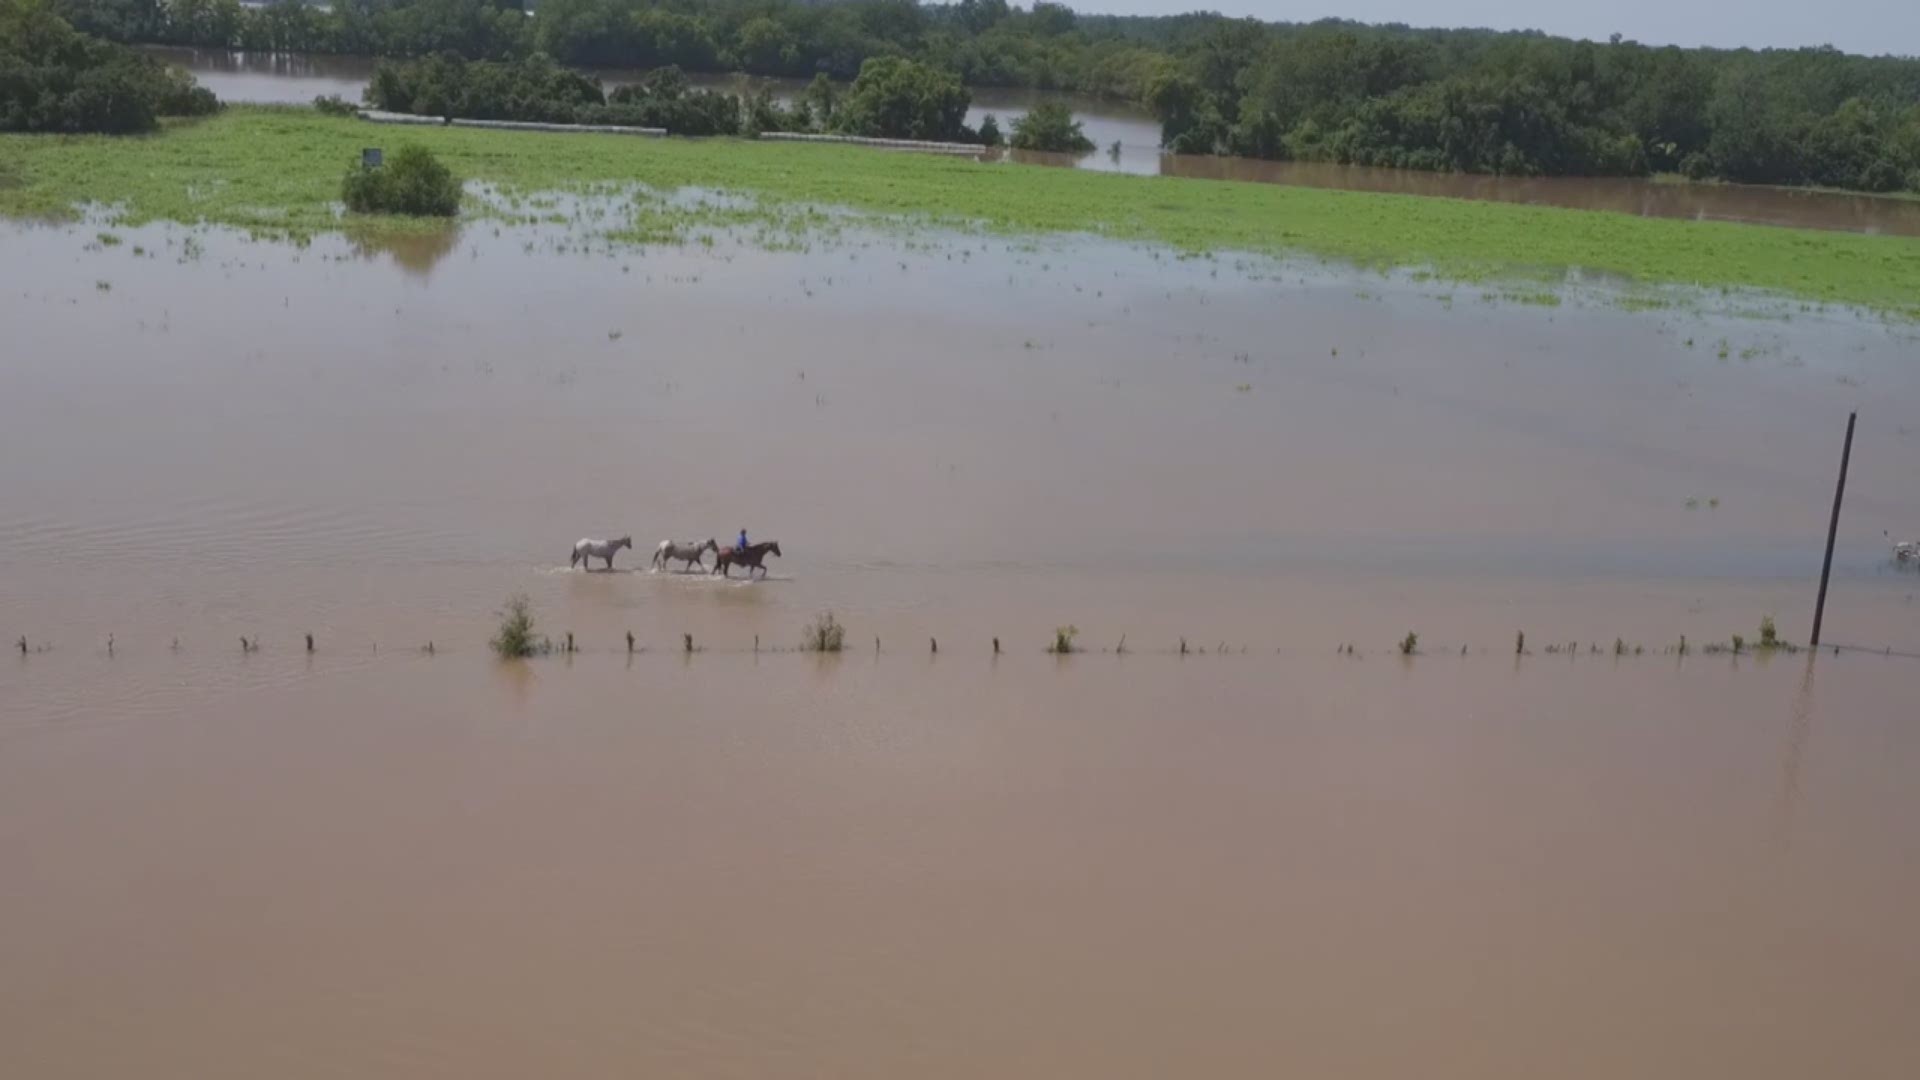 Jessi Kopp, who works in Houston, is one of several volunteers saving more than 30 horses from flood waters in Wharton County.